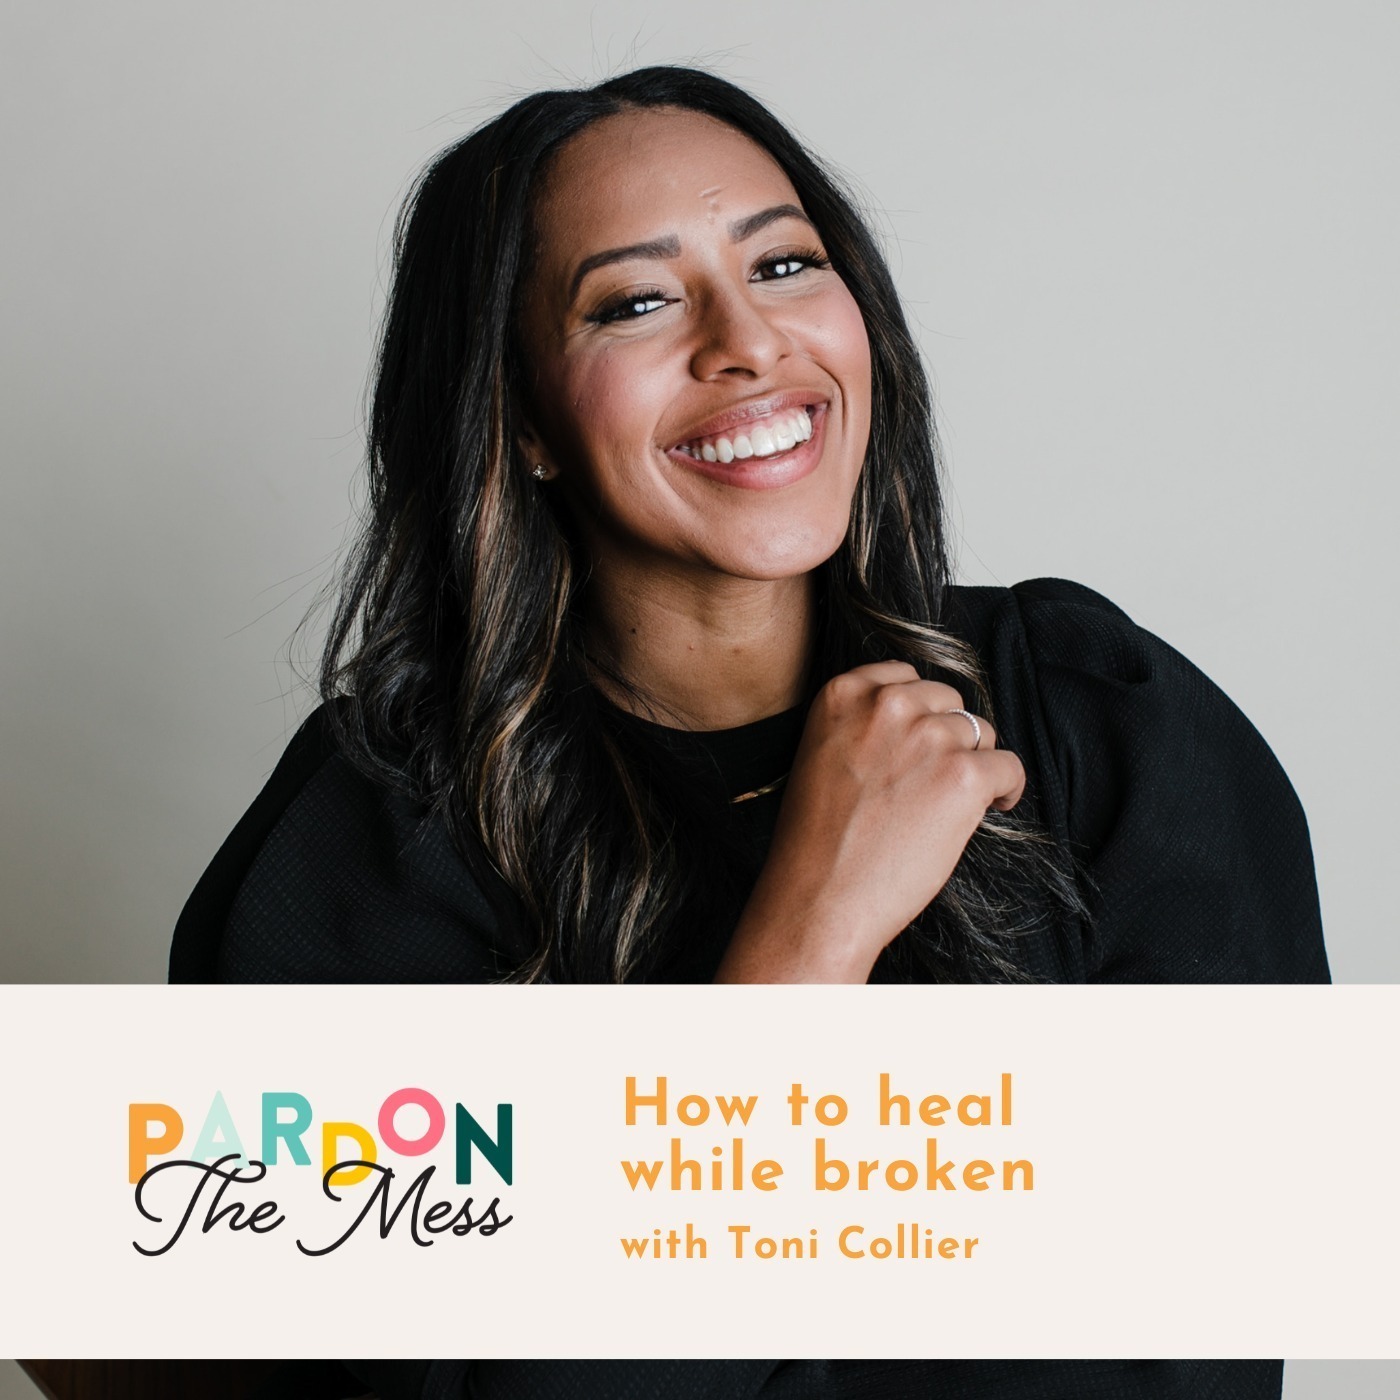 How to heal while broken with Toni Collier